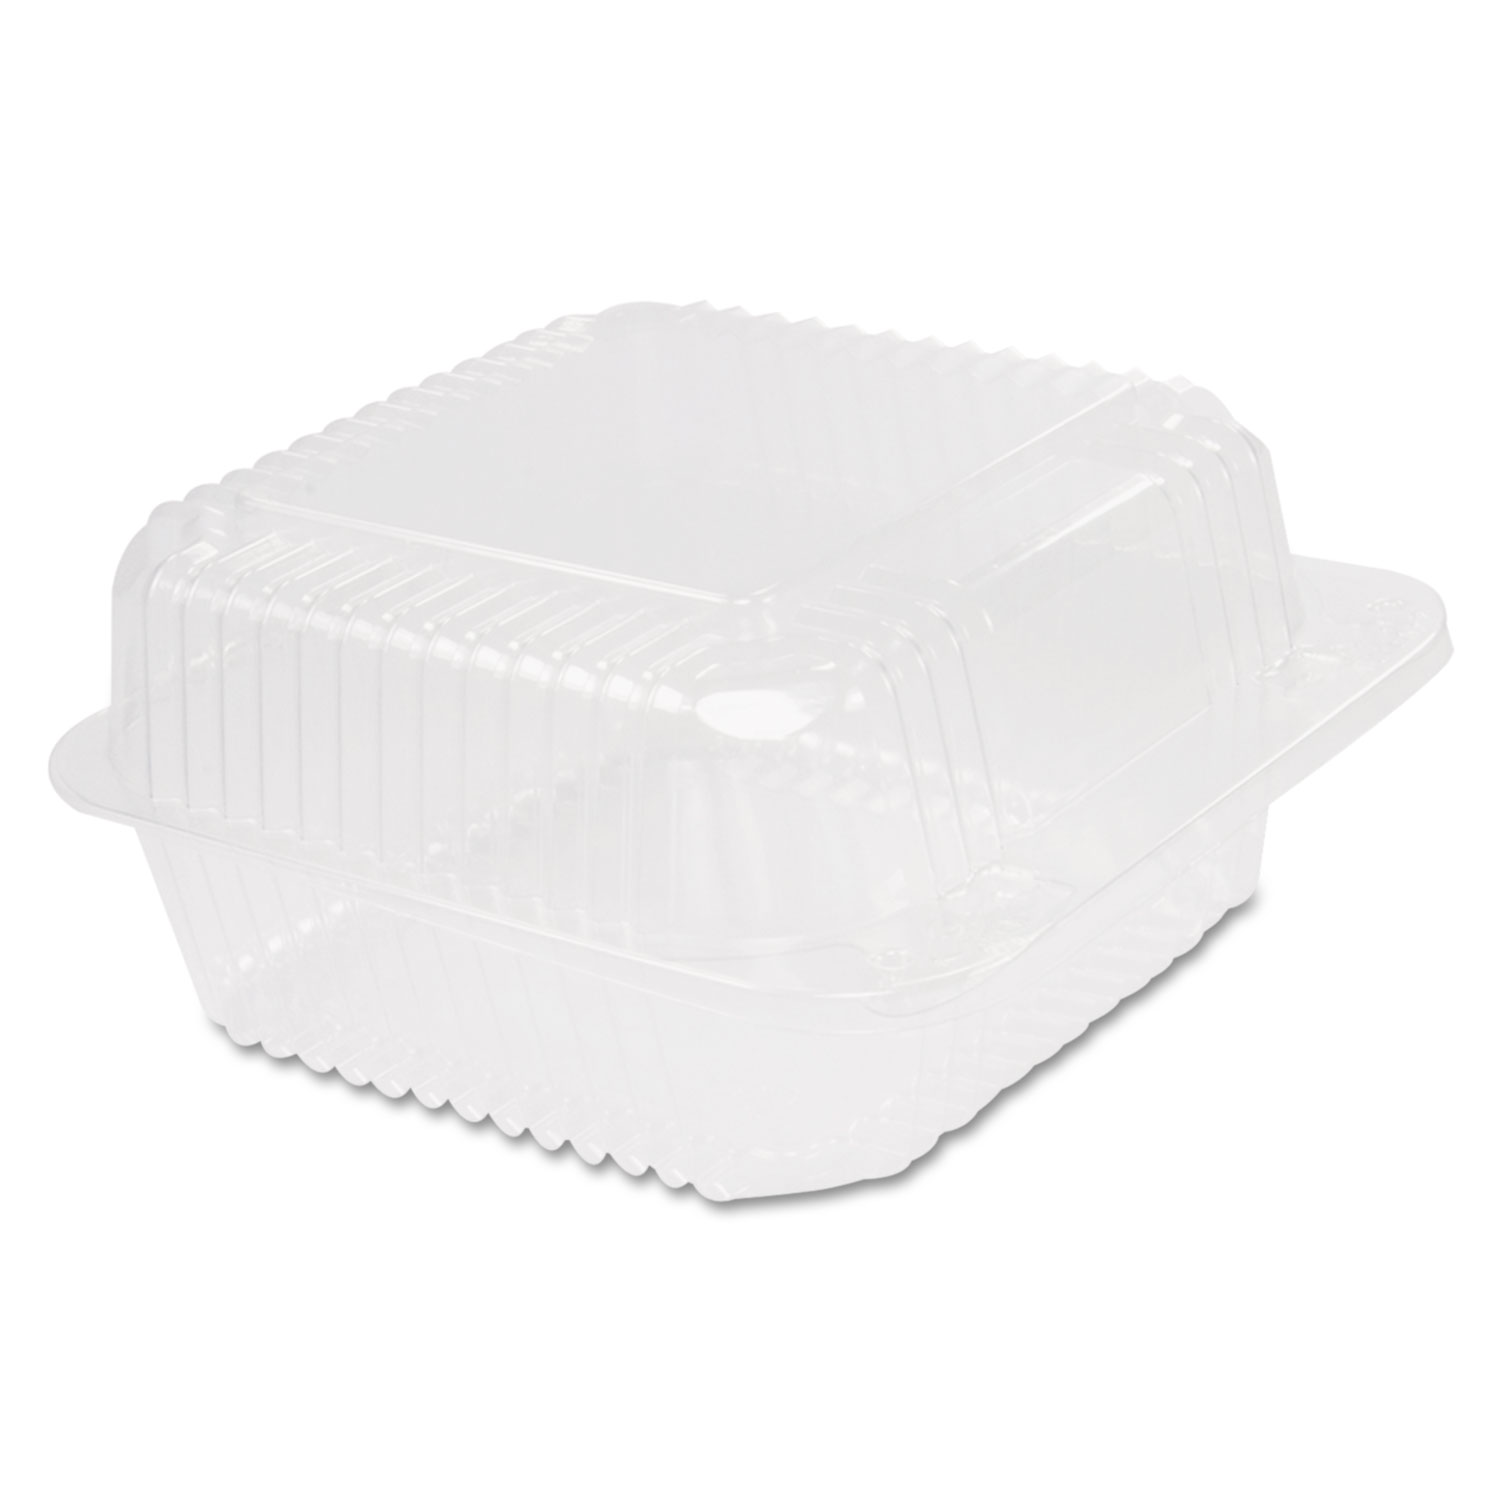 Staylock Clear Hinged Container Square Deep Base, 6 1/10x6 1/2x3,125/PK 4 PK/CT